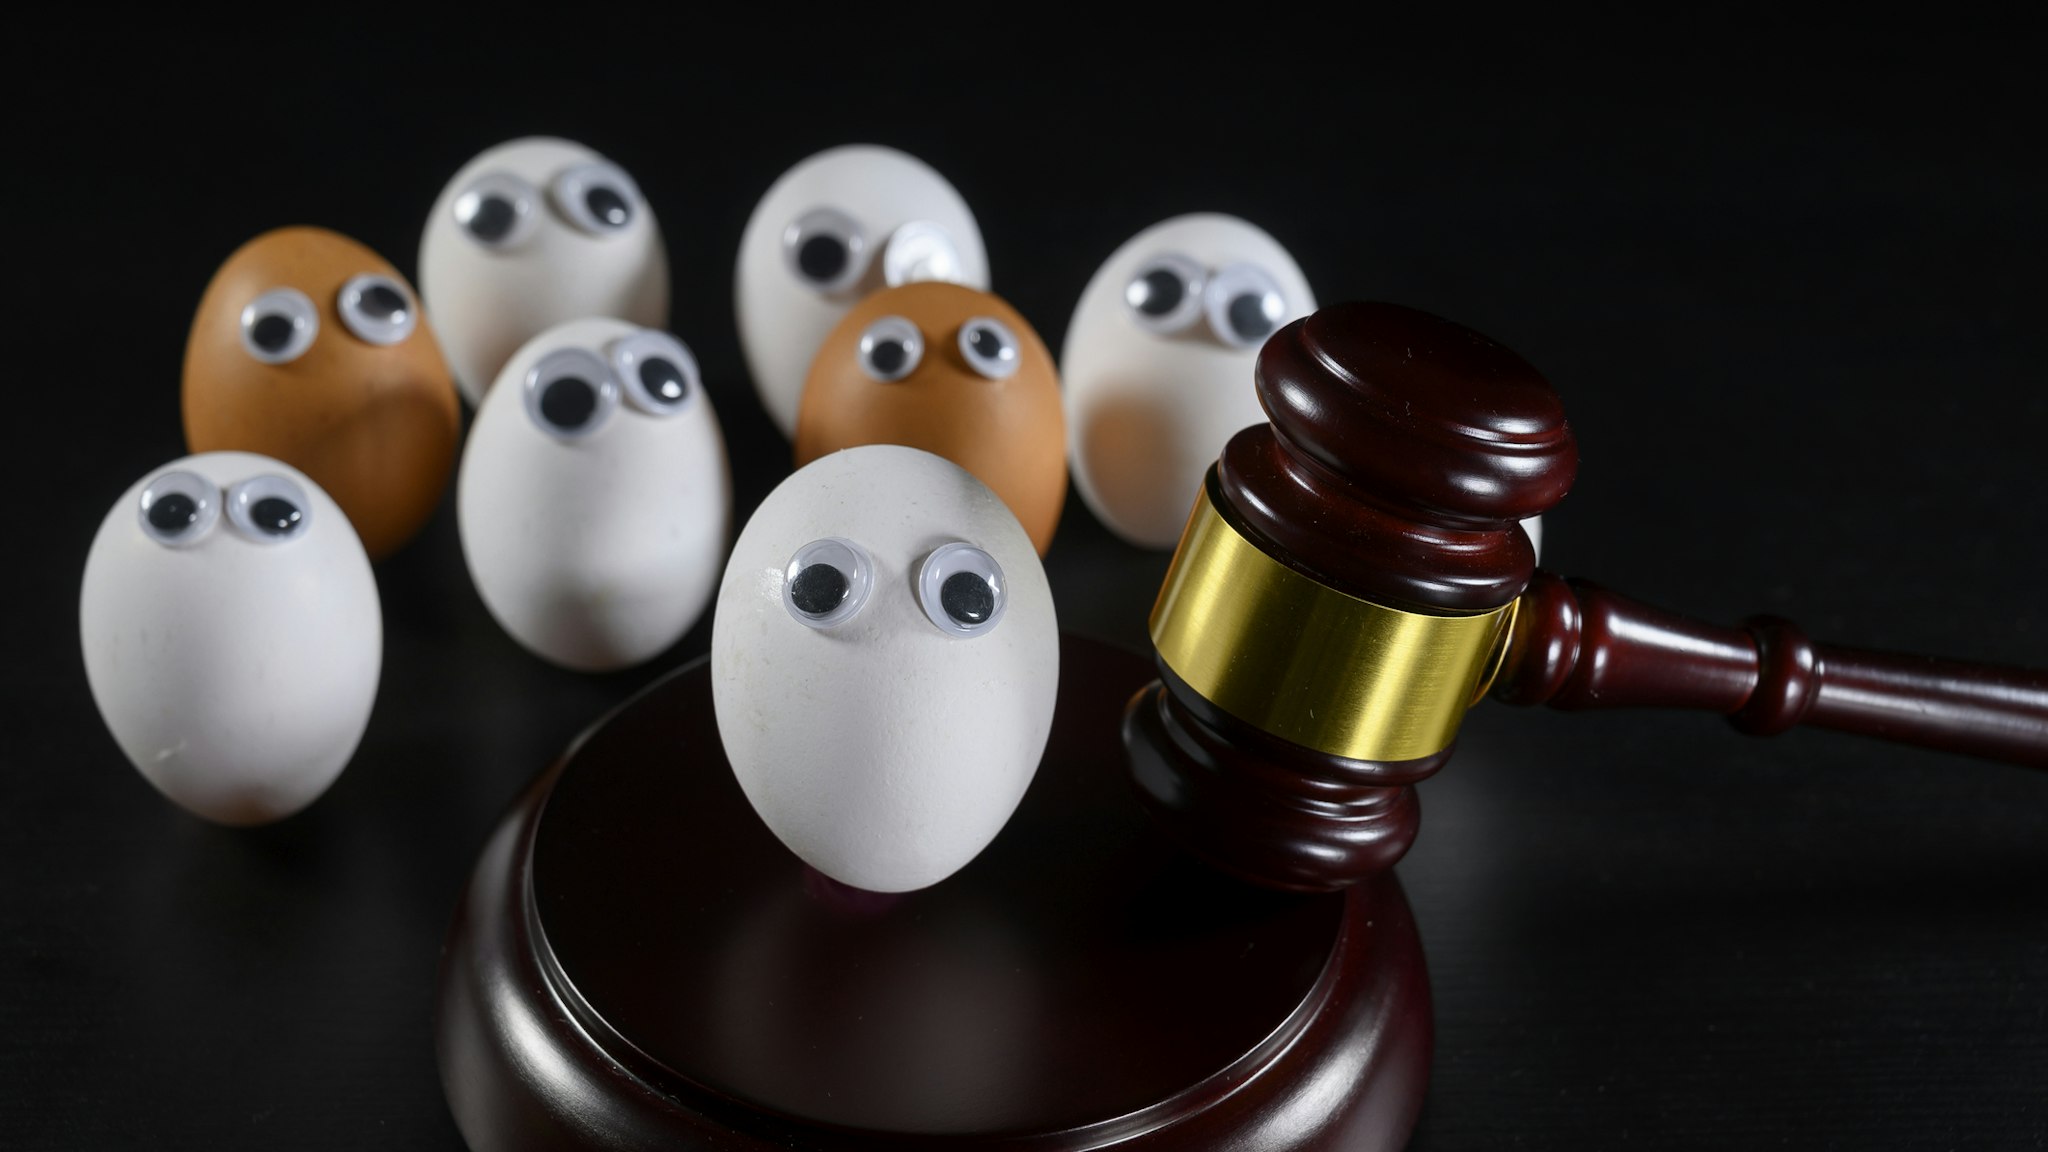 A white egg face is been judge. There are also brown eggs faces within the public. Anti-racism concept. - stock photo